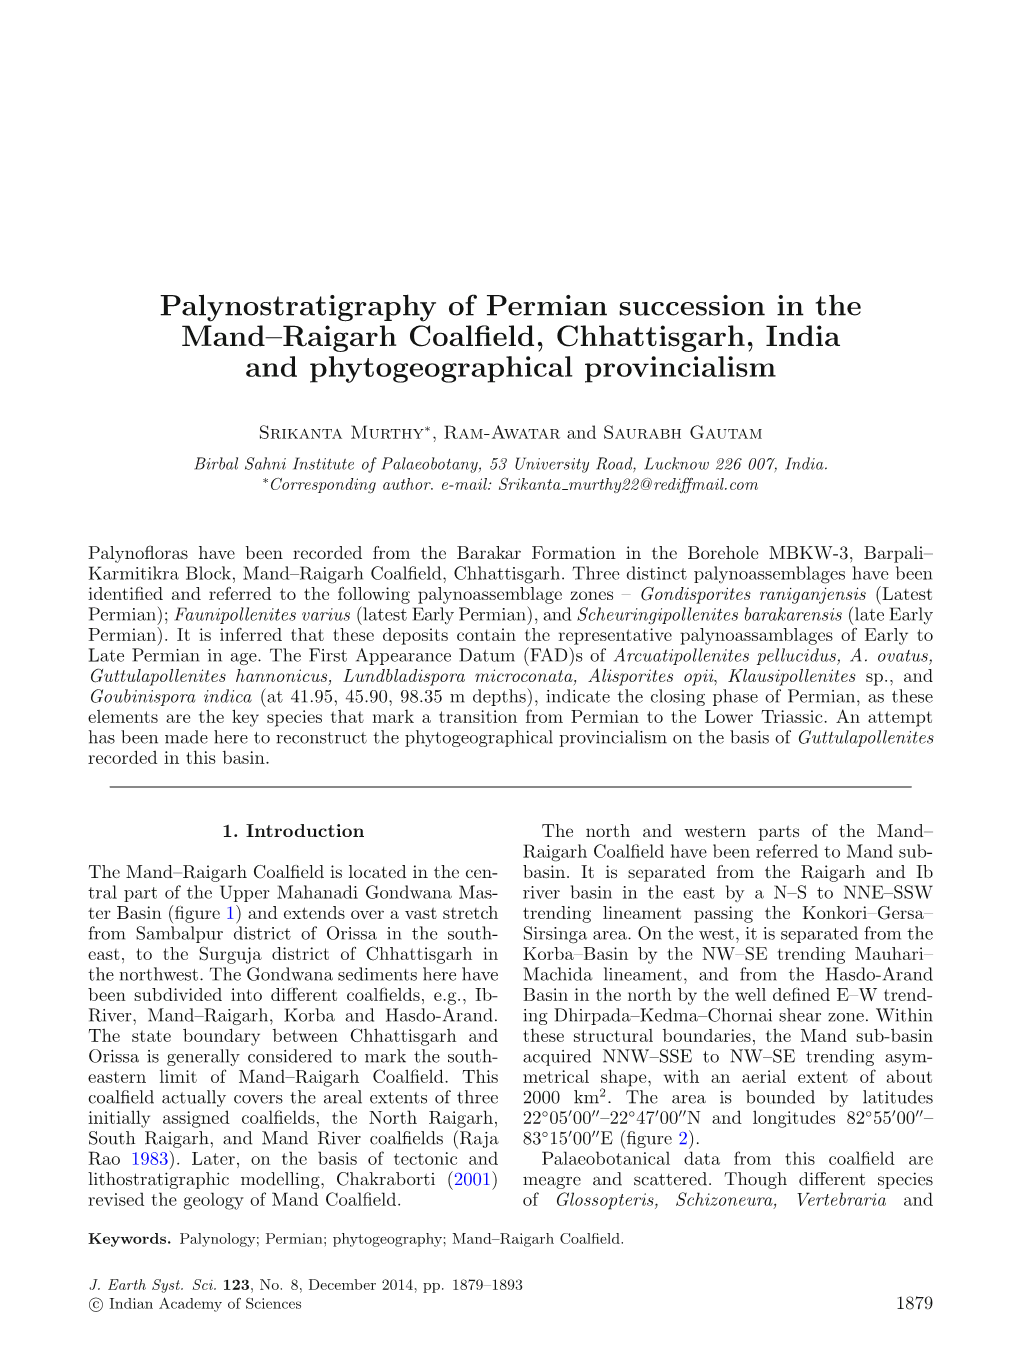 Palynostratigraphy of Permian Succession in the Mand–Raigarh Coalfield, Chhattisgarh, India and Phytogeographical Provincialis